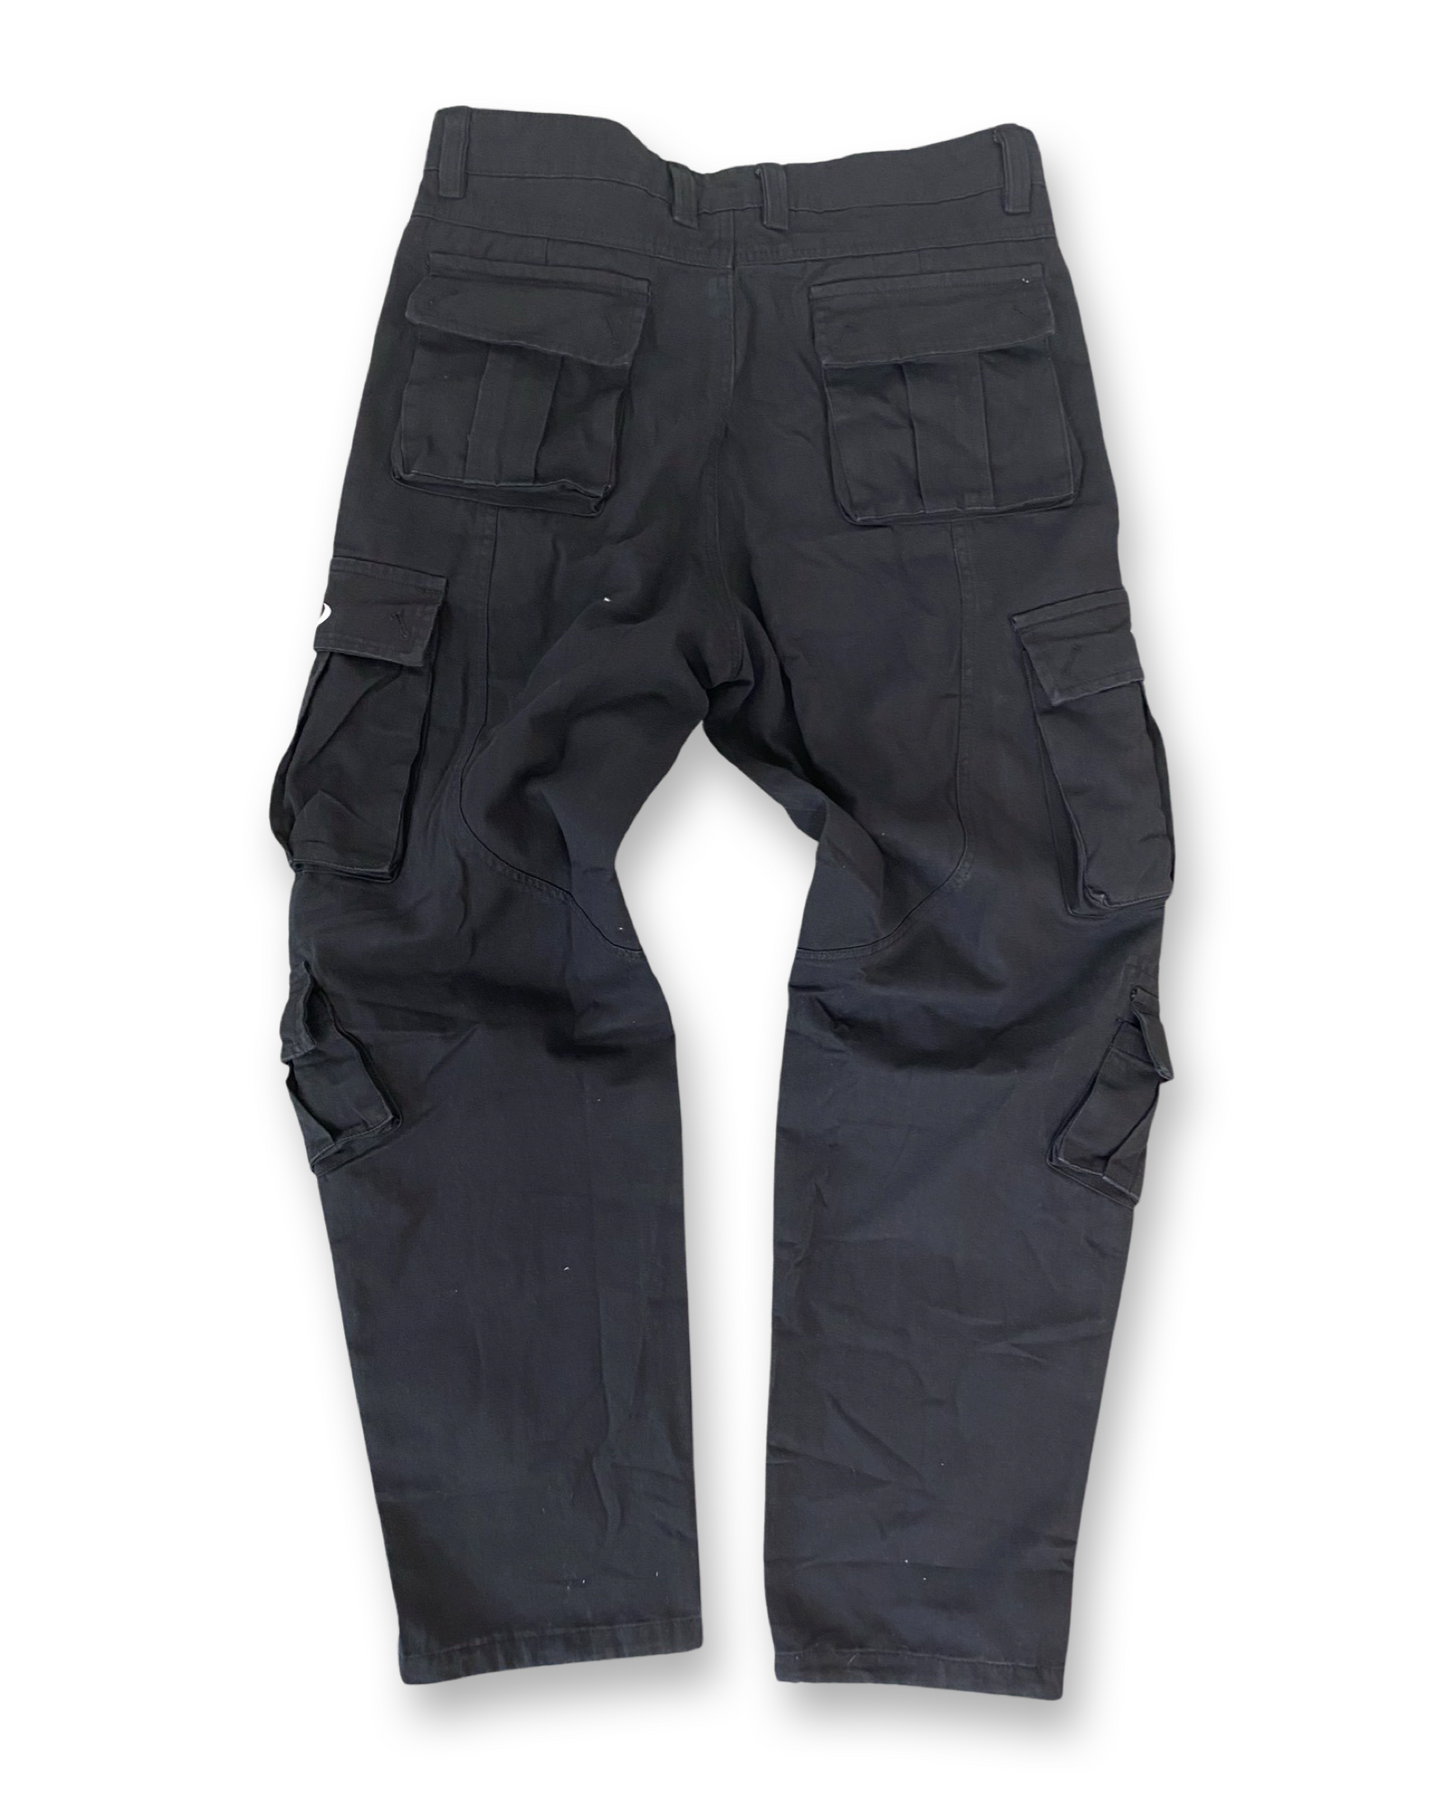 The Cargo Pant